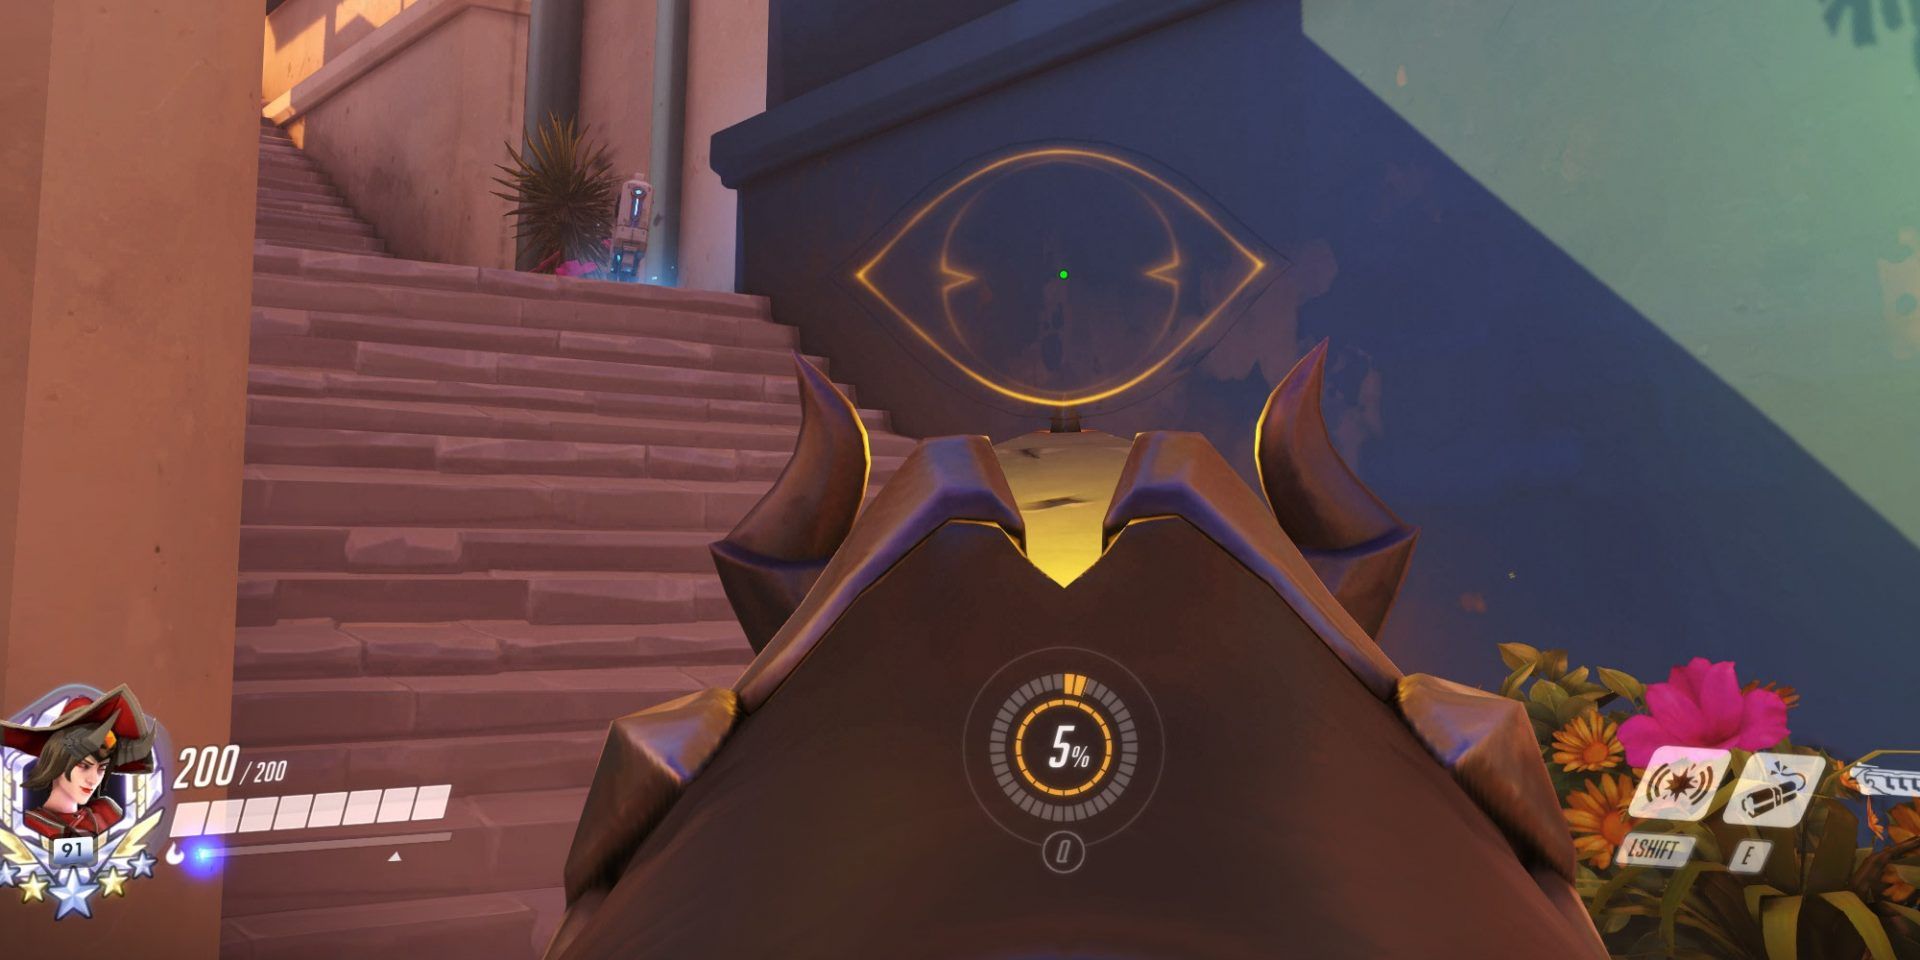 Ashe aiming down her sights